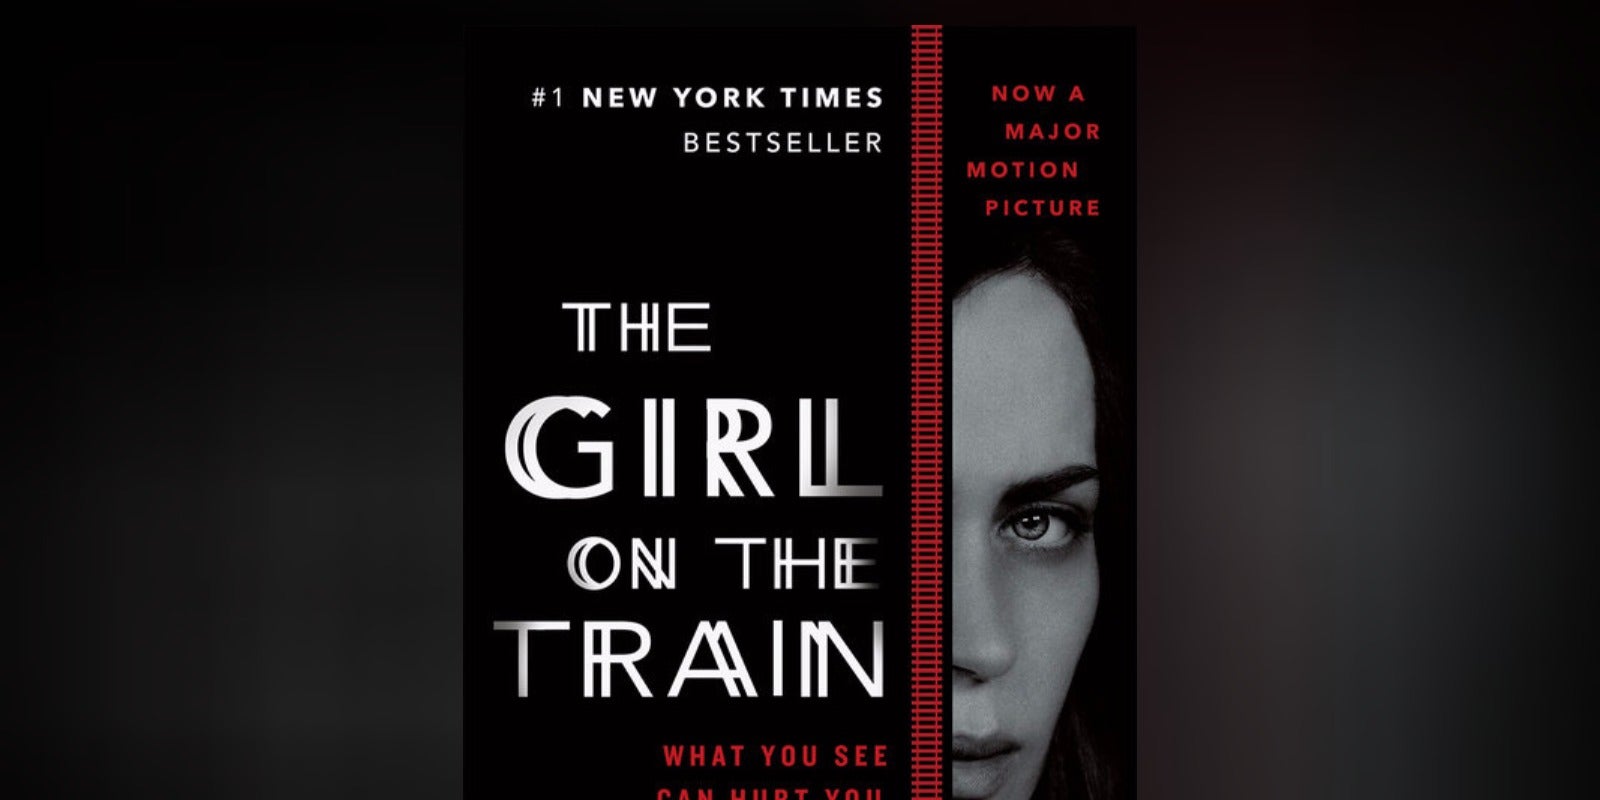 GIRL ON THE TRAIN: Movie tie-in cover revealed!